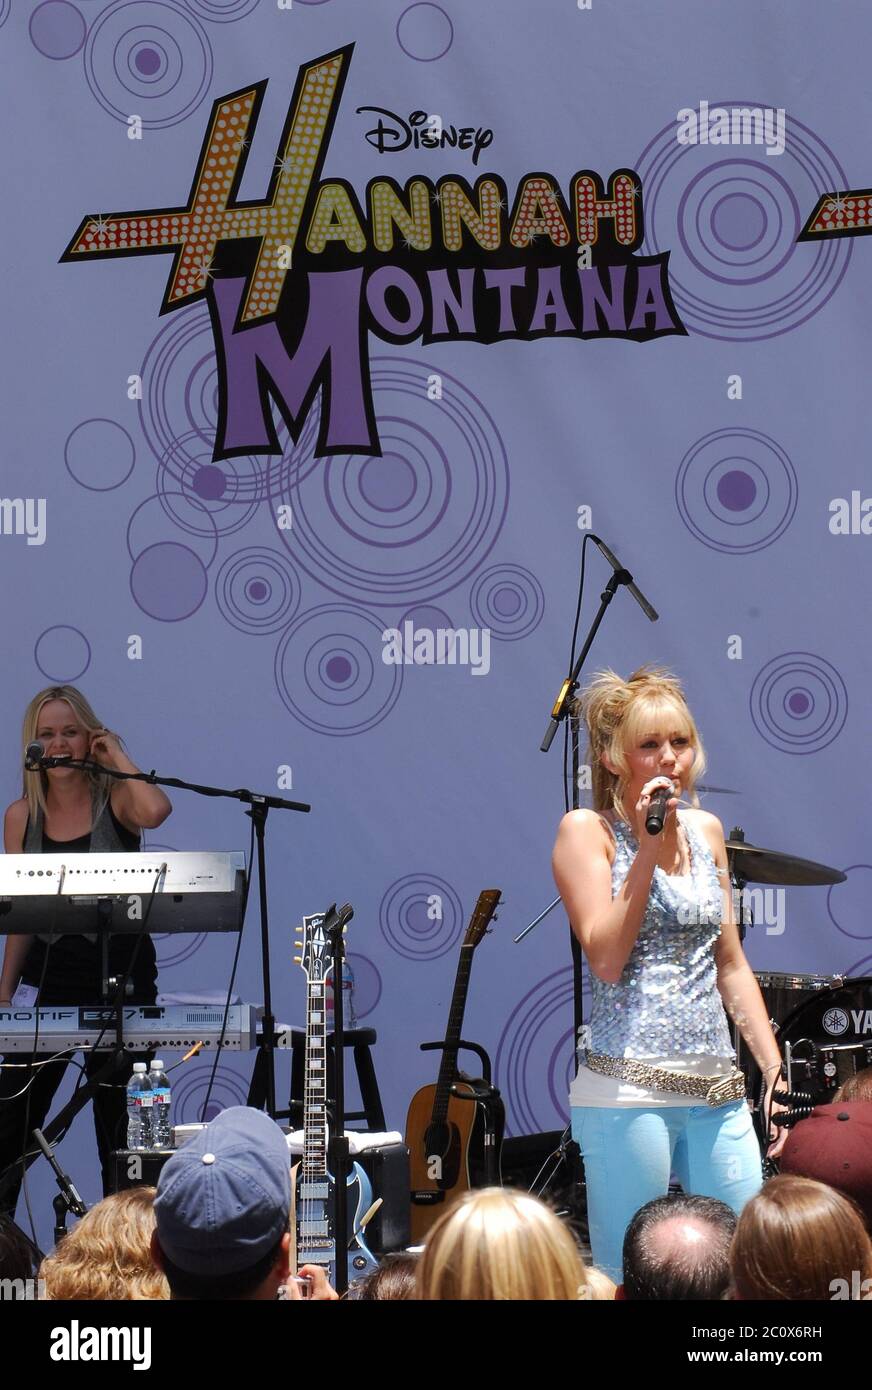 Miley Cyrus performs as Hannah Montana at the Disney Channel Superstar